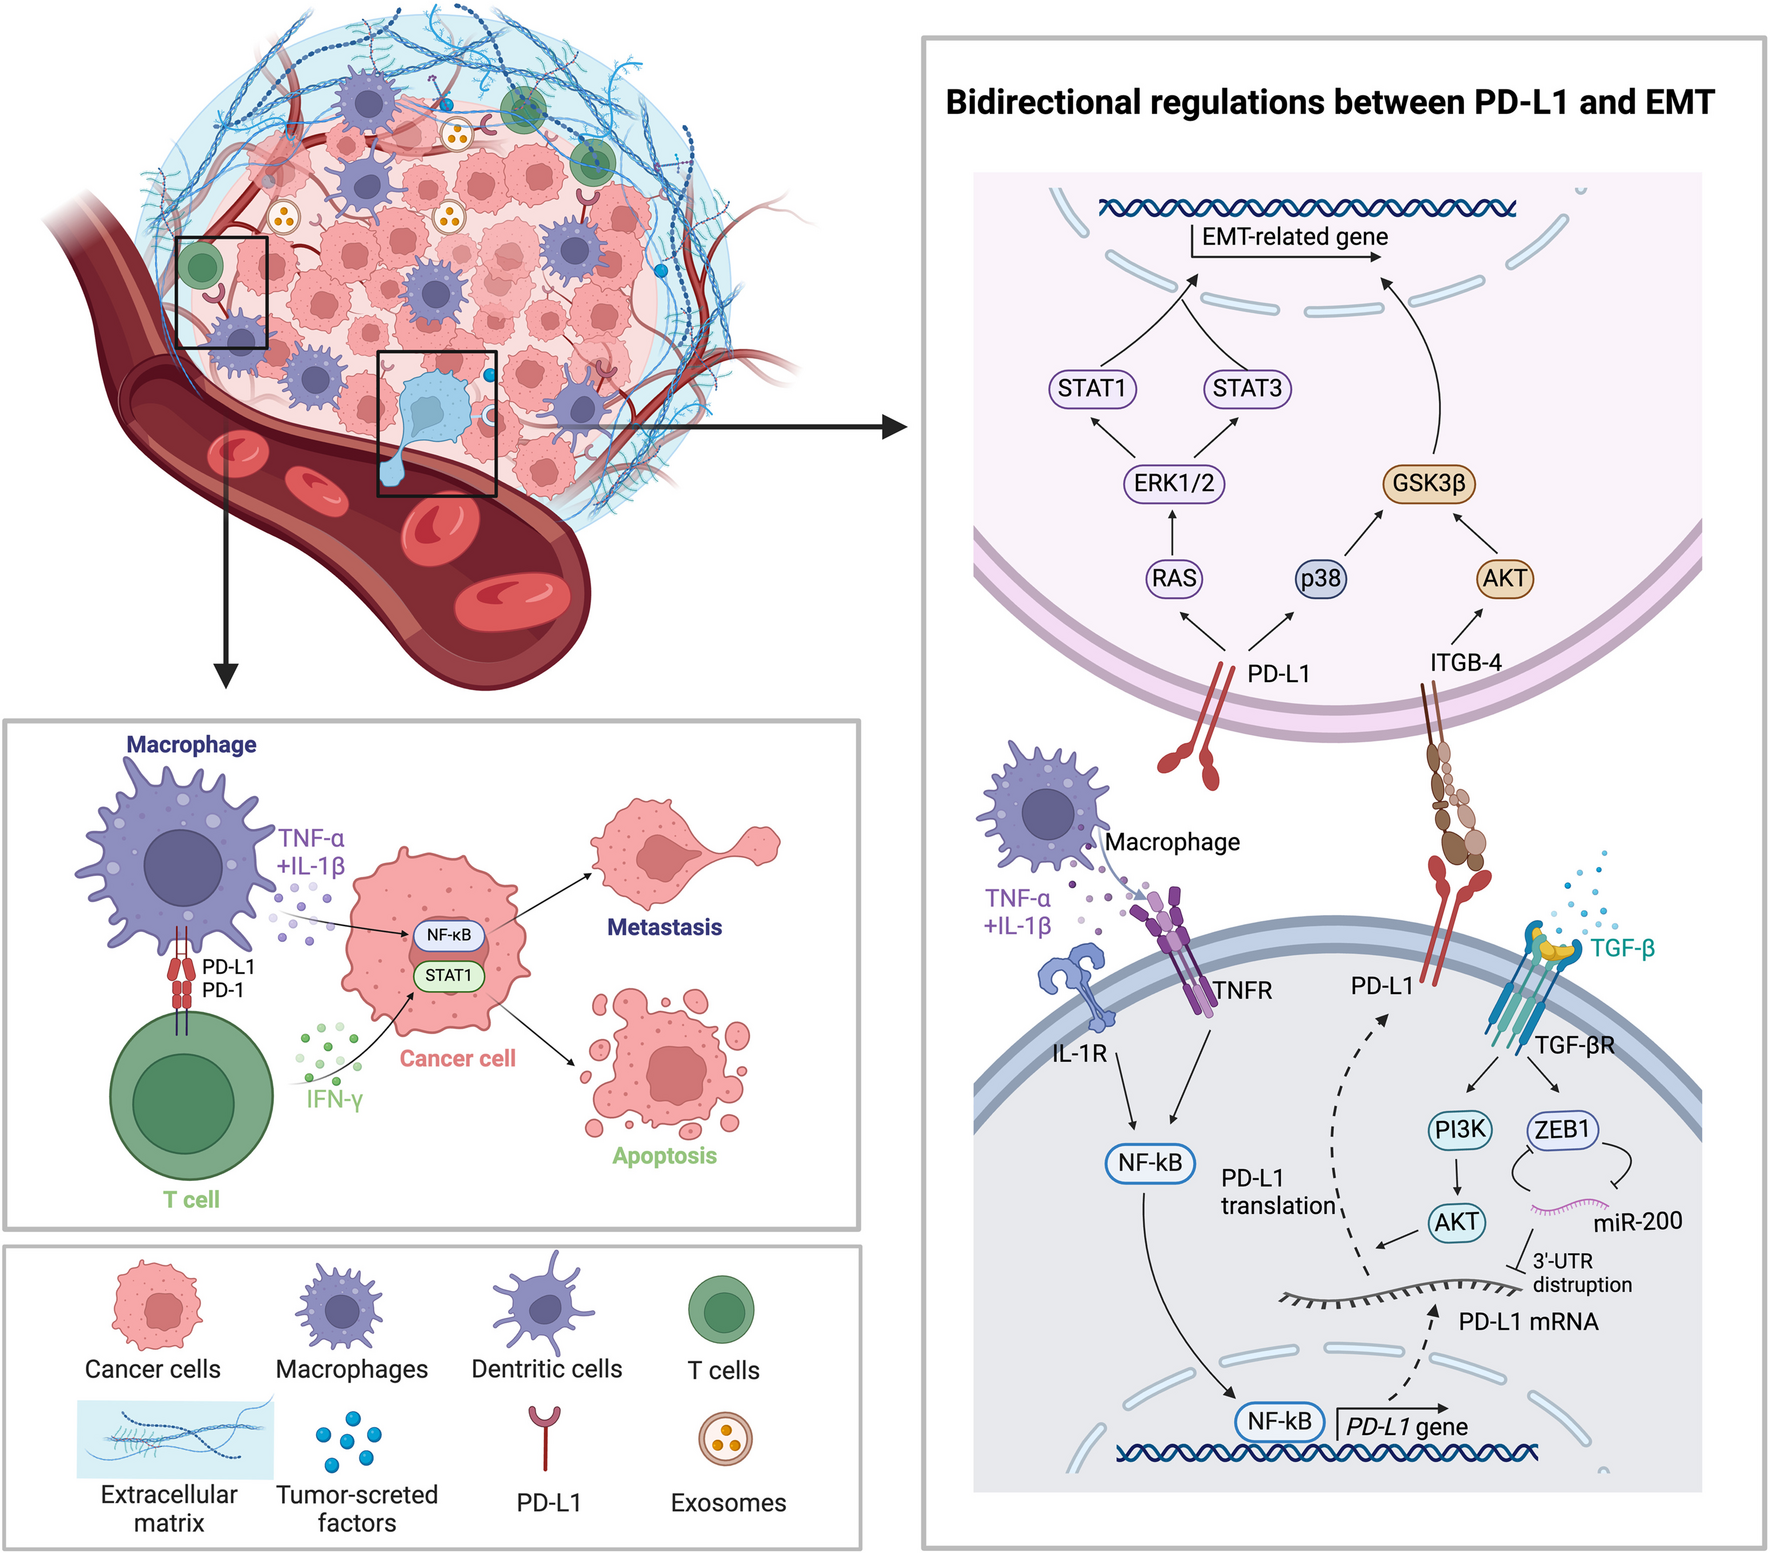 The roles of PD-L1 in the various stages of tumor metastasis